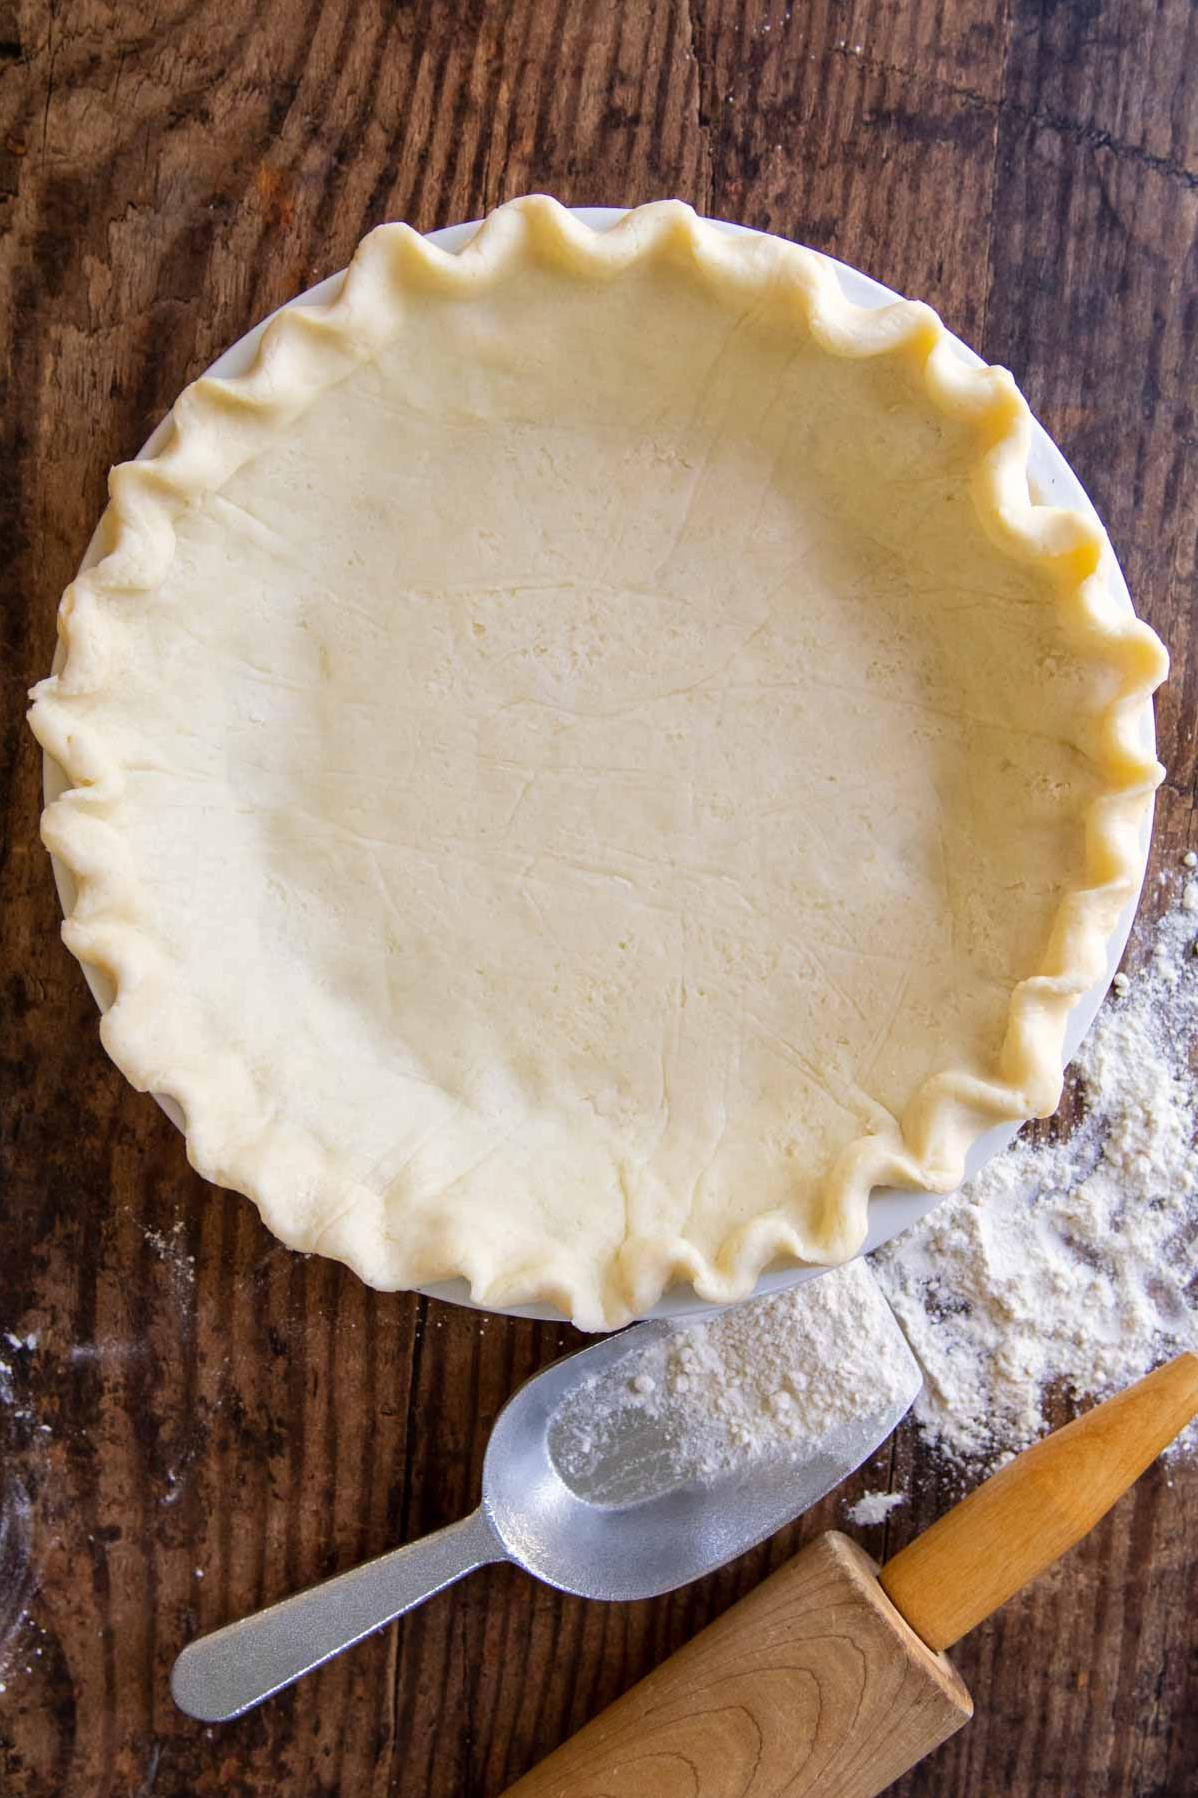  Who says gluten-free food can't be delicious? This pie crust will change your mind.